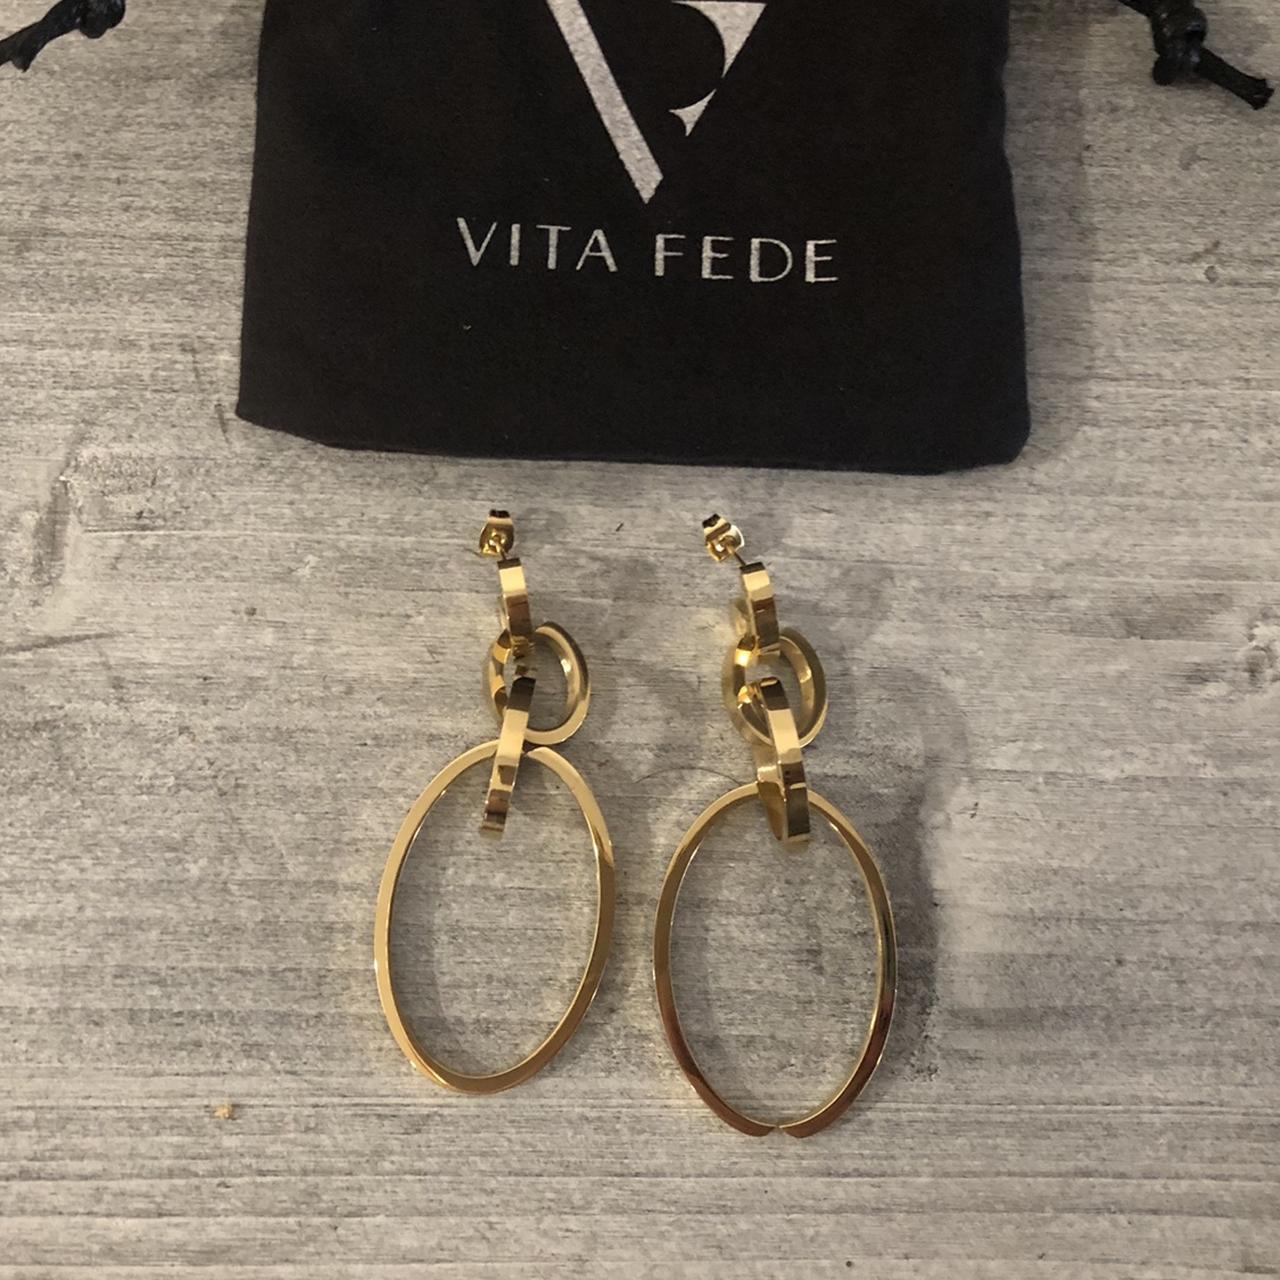 Product Image 2 - These modular earrings from Vita